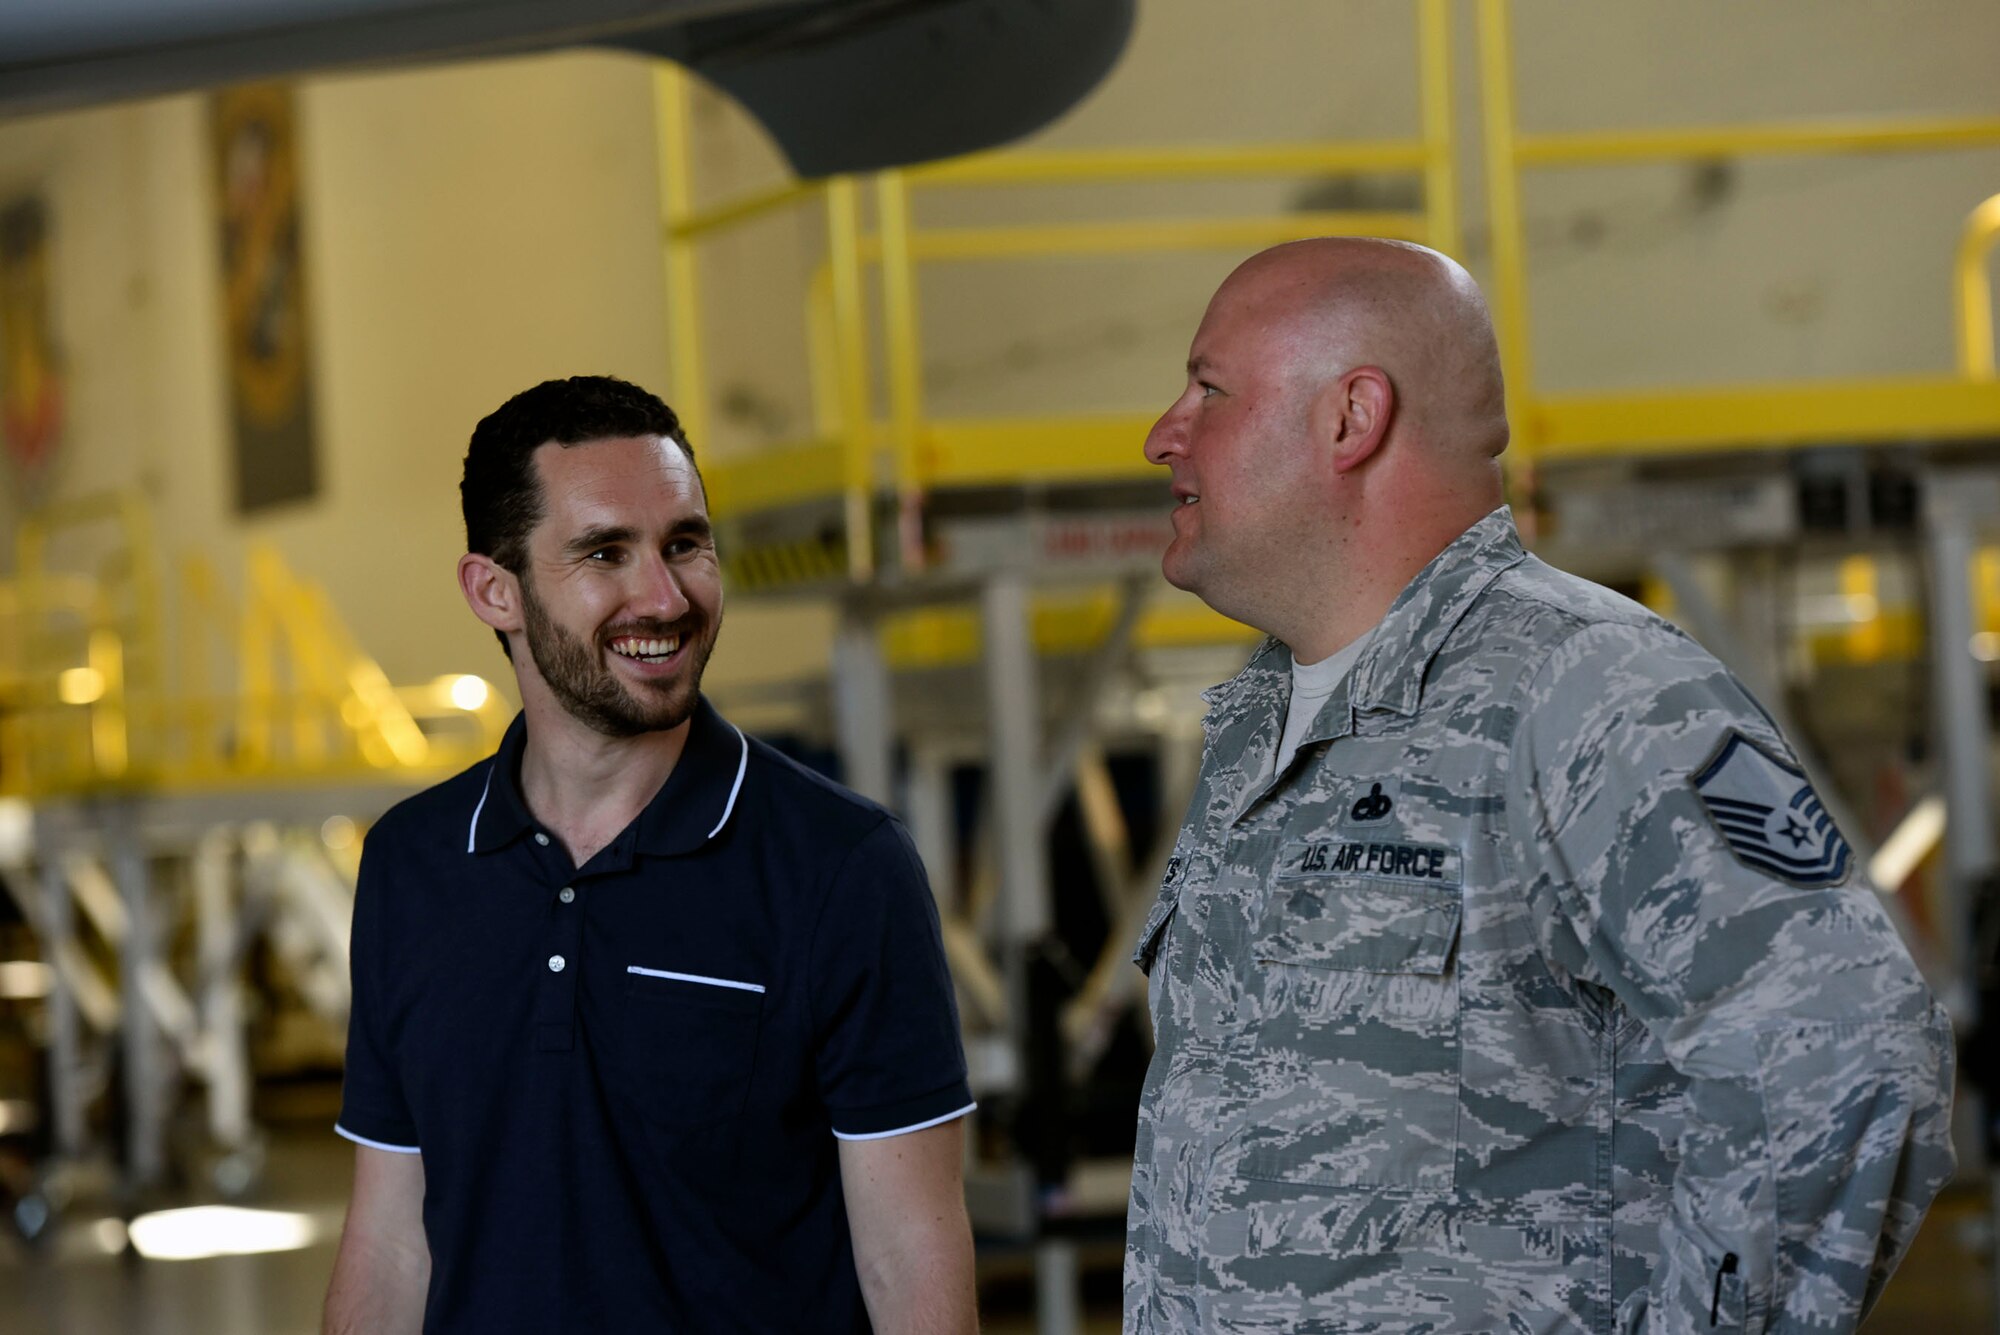 Master Sgt. Jason Butts, right, 23d Maintenance Squadron A-10C Thunderbolt II phase section chief, explains the functions of an A-10 to Colby Steiner, RAND Corporation associate physical scientist, during a visit, Aug. 8, 2018, at Moody Air Force Base, Ga. RAND integrated with Moody’s rescue, flying and maintenance professionals to examine firsthand Air Force operations. This familiarization helps RAND develop their analysis to ultimately present policy recommendations to Air Force decision makers. Since 1948, RAND has performed analysis for the U.S. Air Force. (U.S. Air Force photo by Senior Airman Greg Nash)